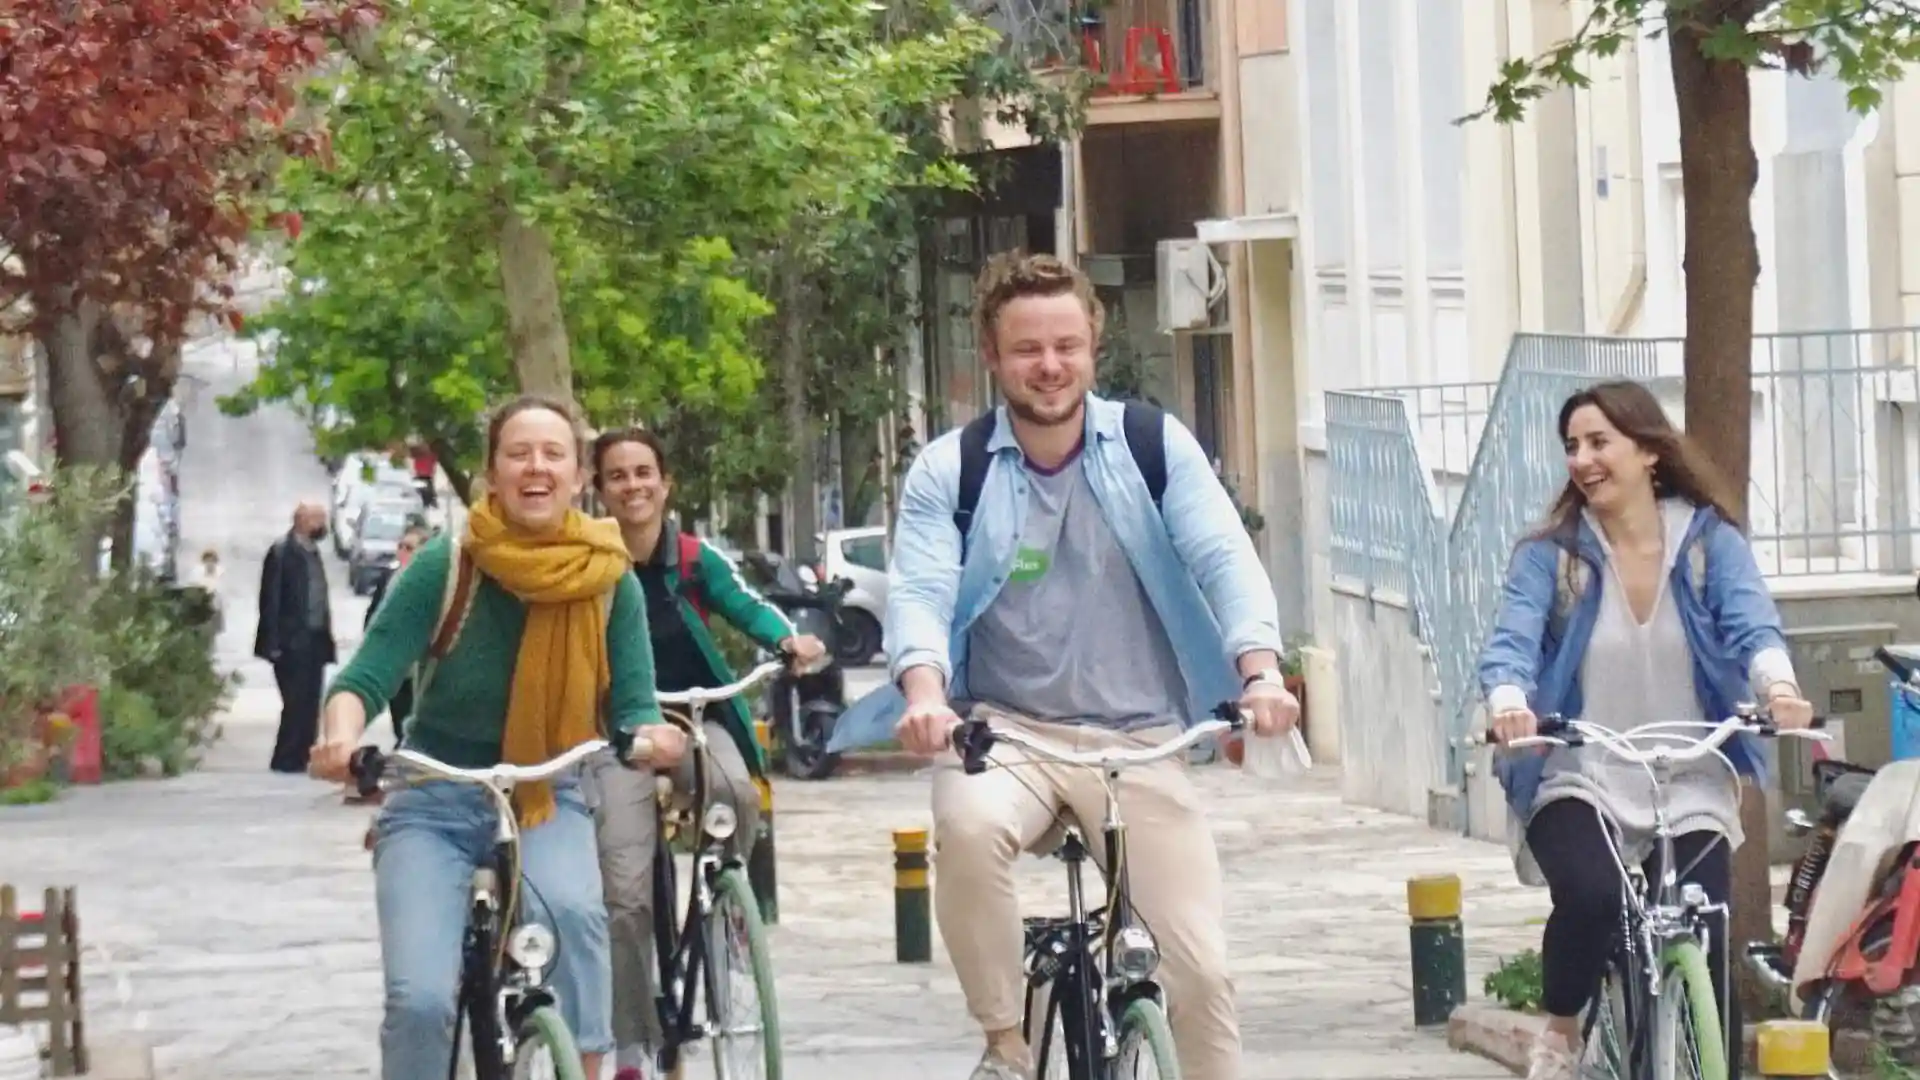 During our Highlights bike tour in English Dutch or German, a group of people enjoys cycling across Athens city center